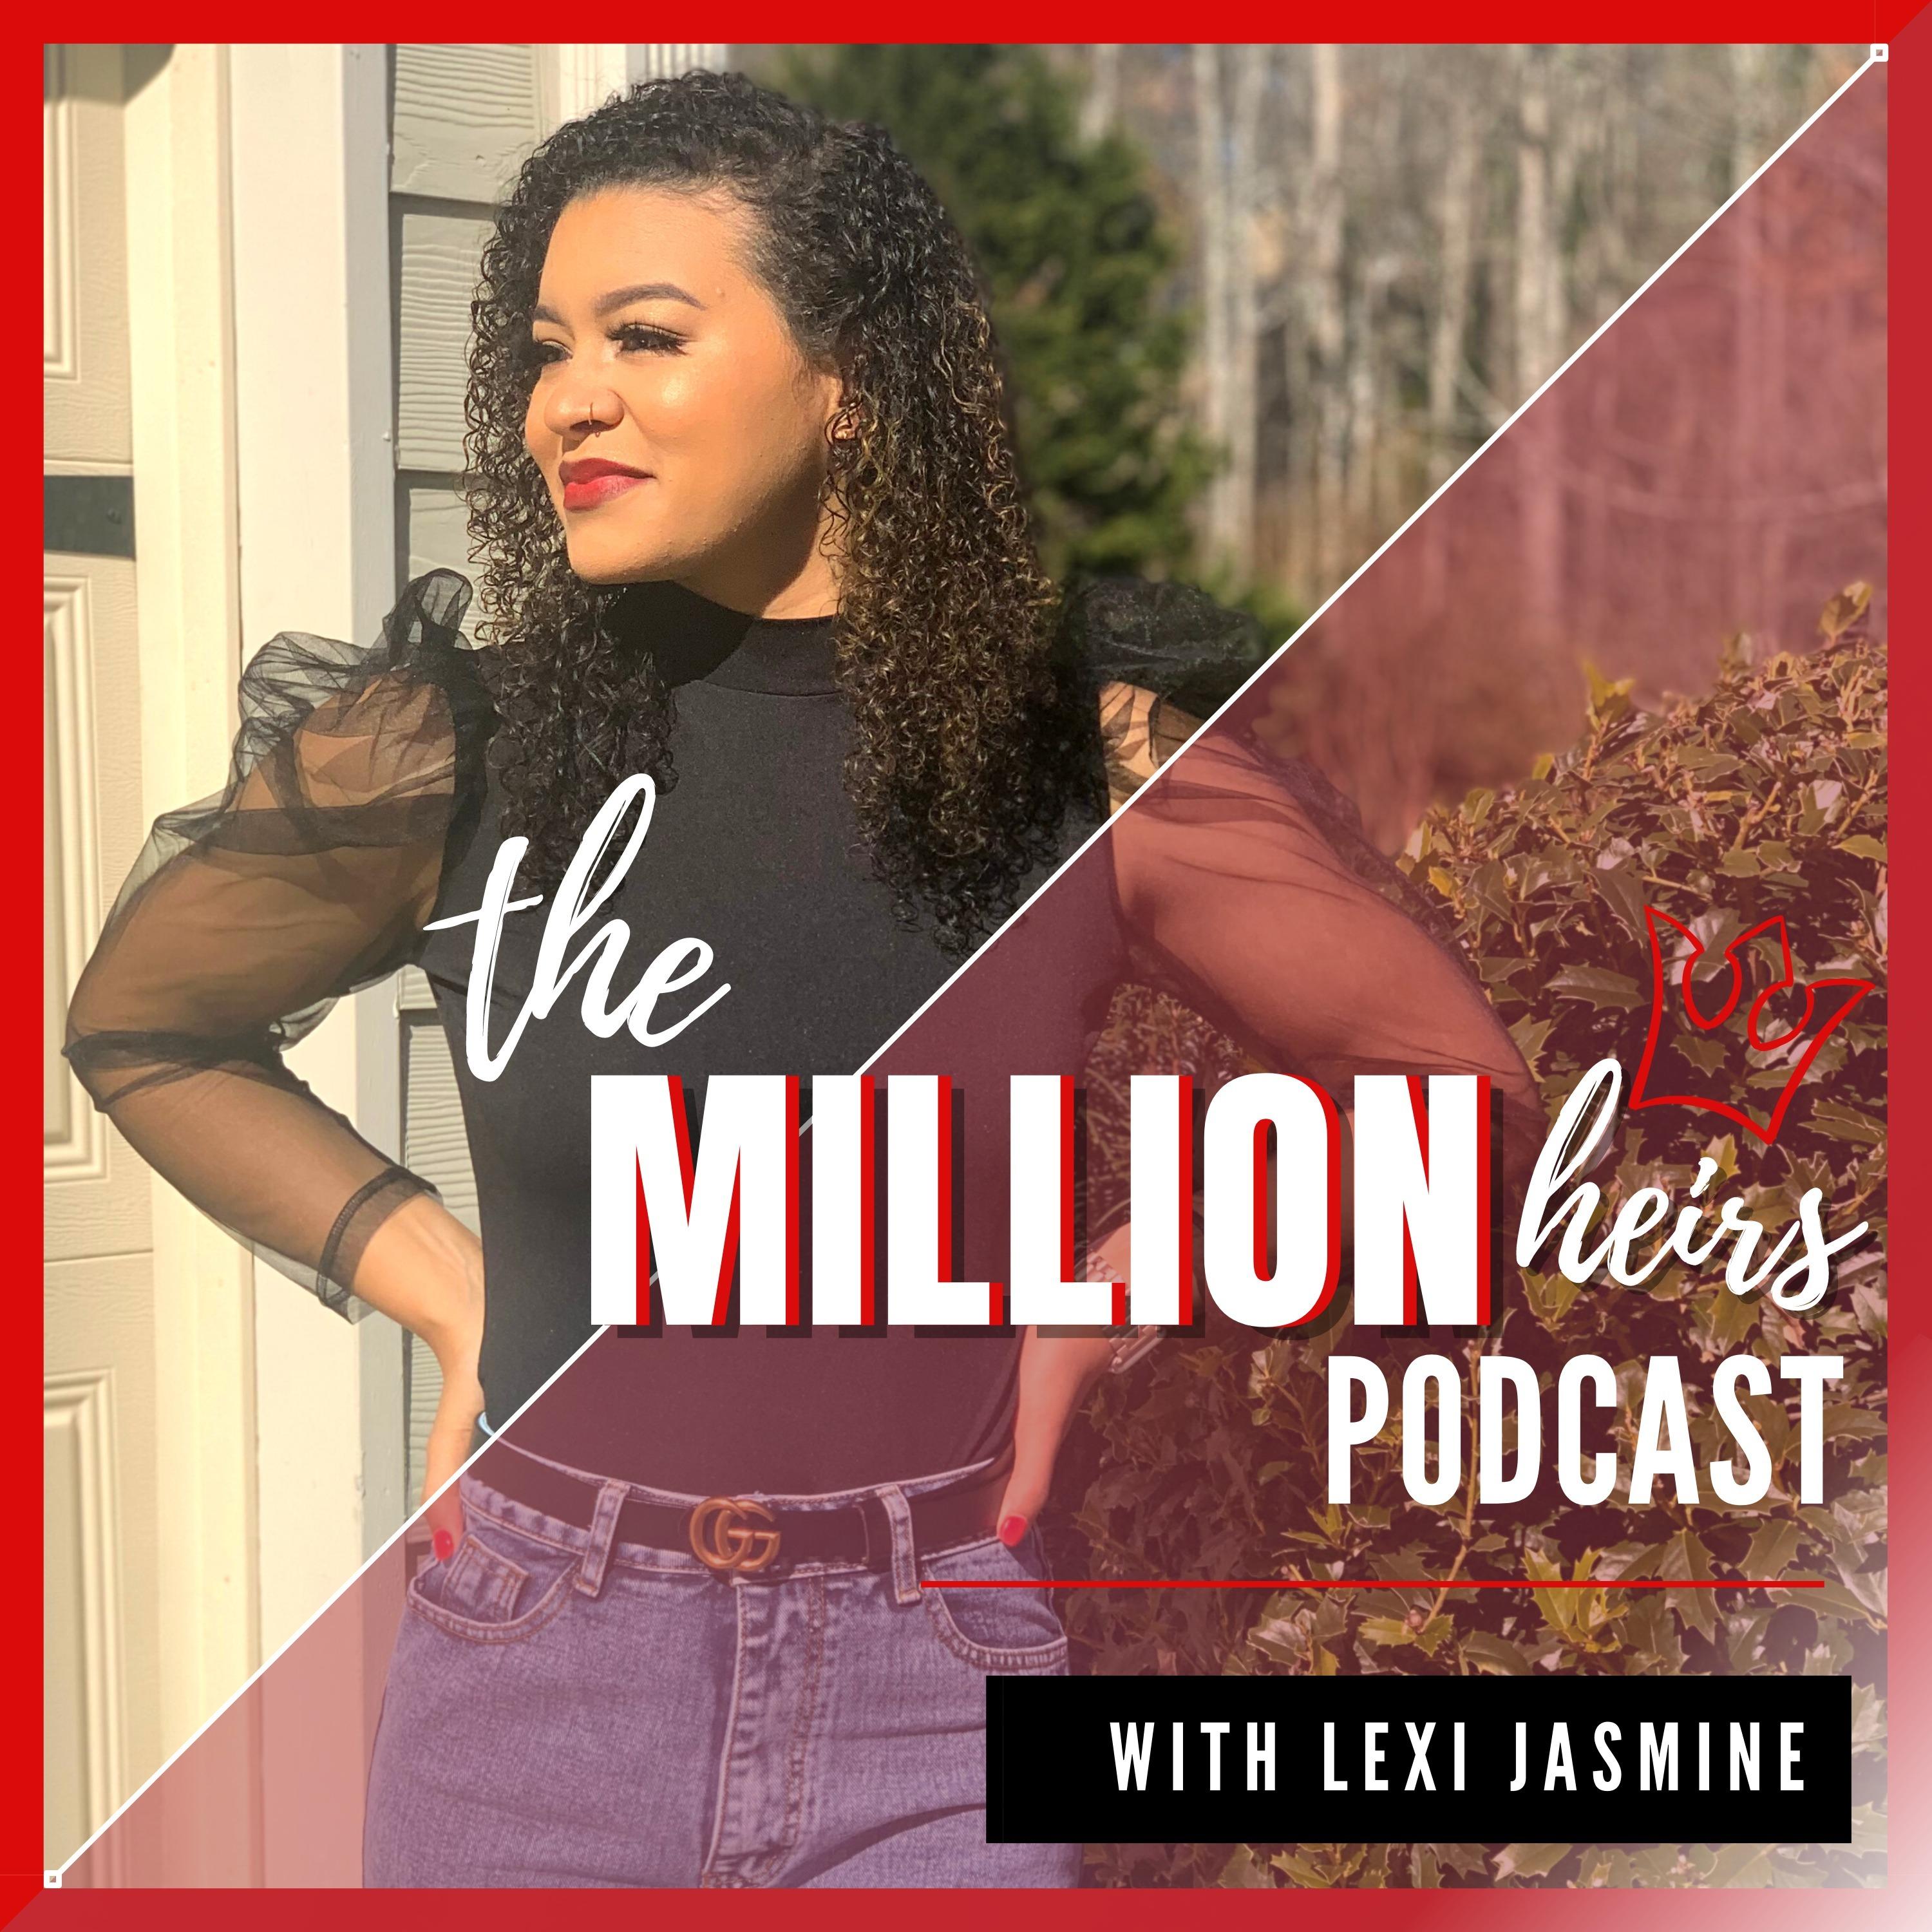 The Millionheirs Podcast